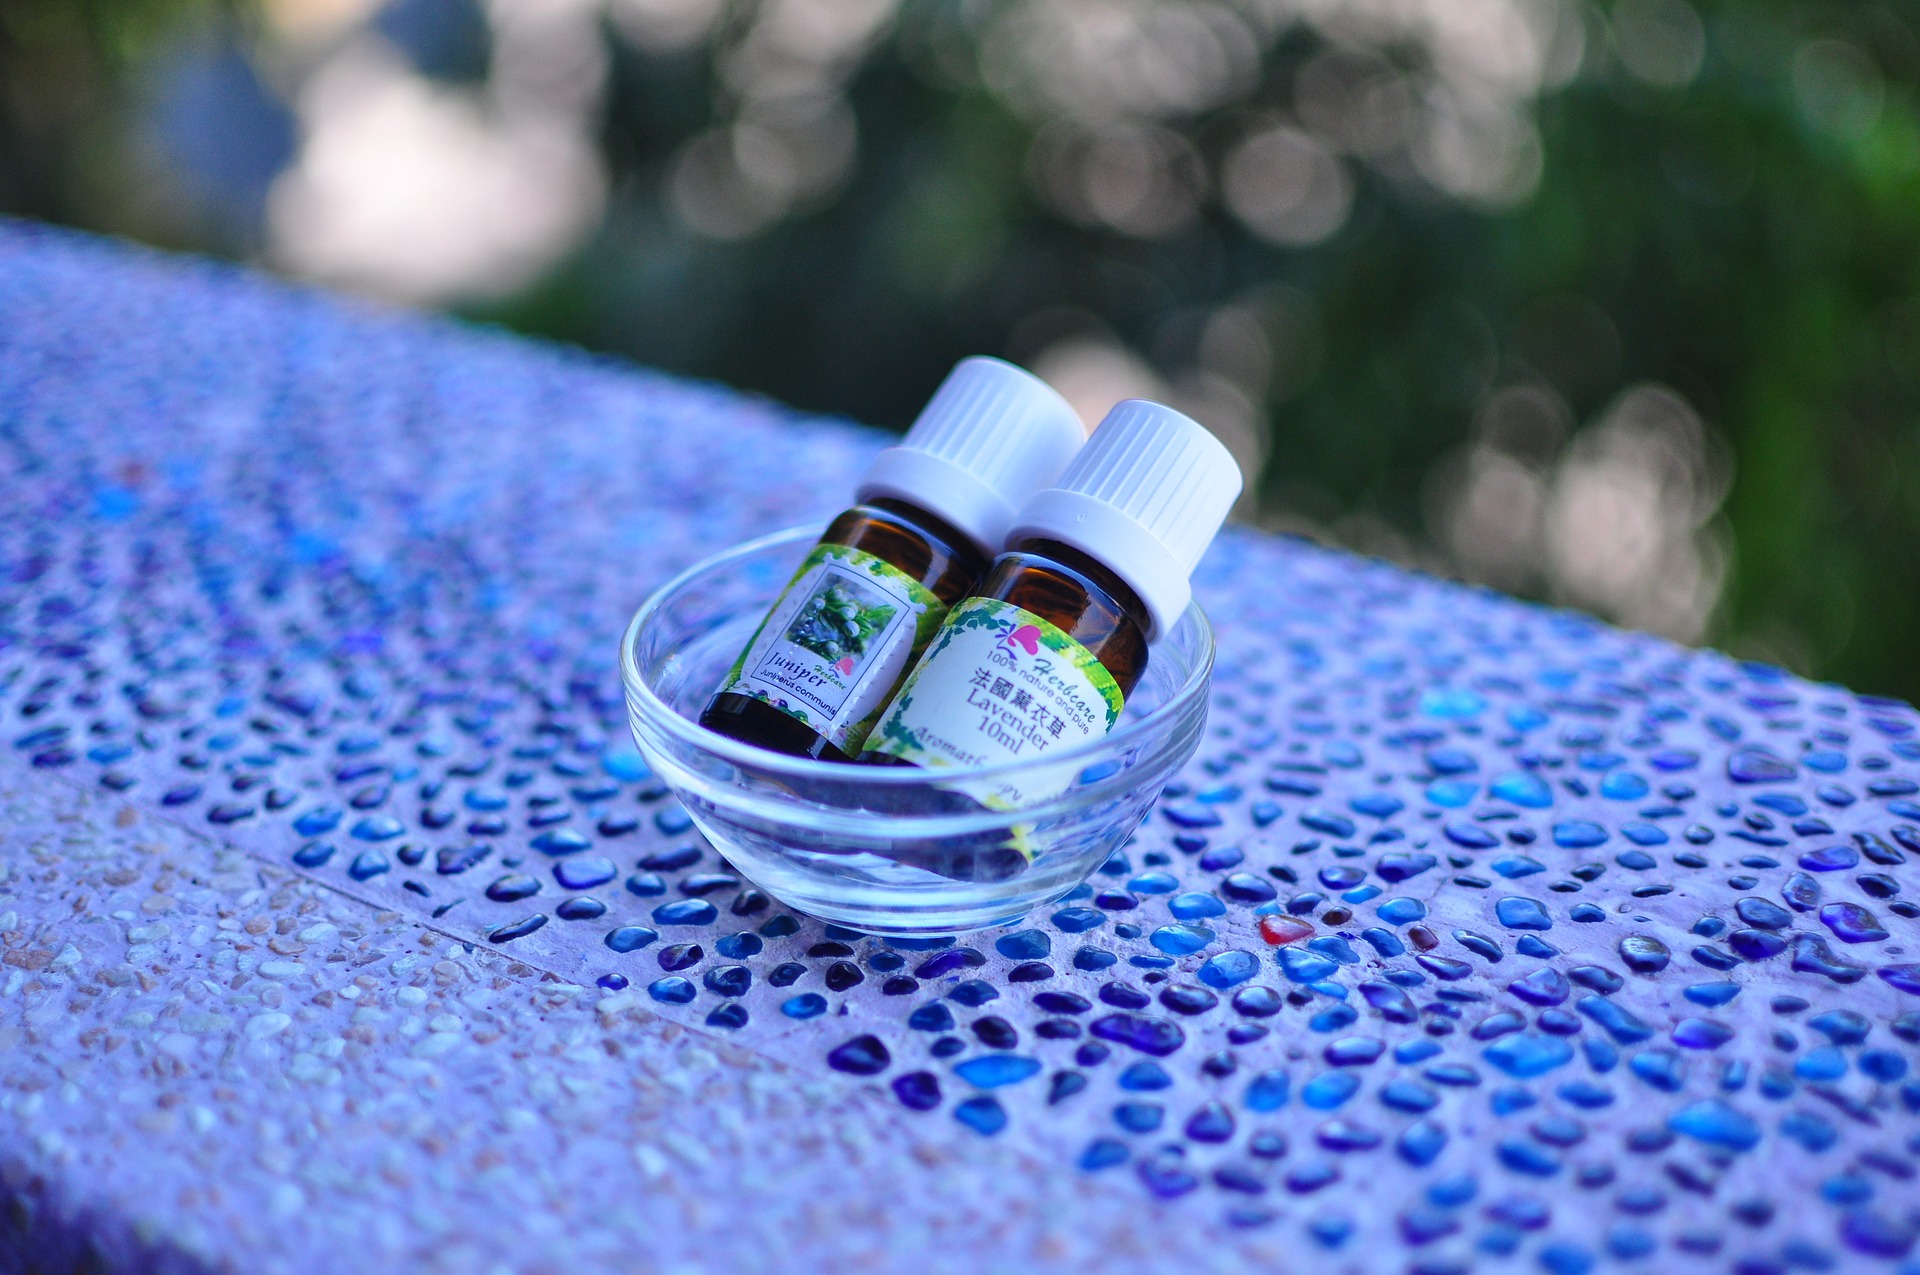 Ranking of the best Asian facial oils for 2022